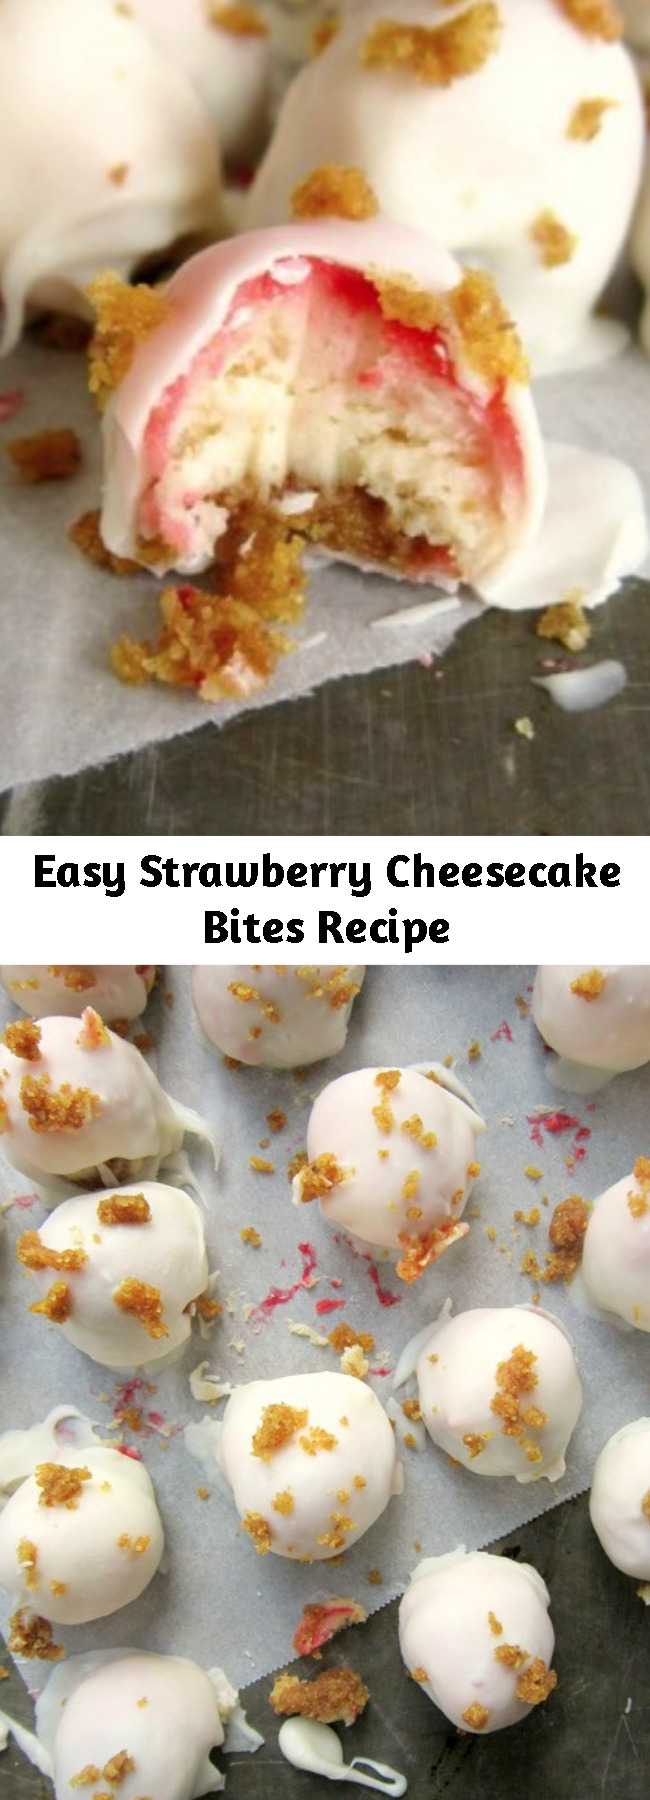 Easy Strawberry Cheesecake Bites Recipe - These little Strawberry Cheesecake Bites are just the perfect size!  And having them dipped in white chocolate is even an extra treat!